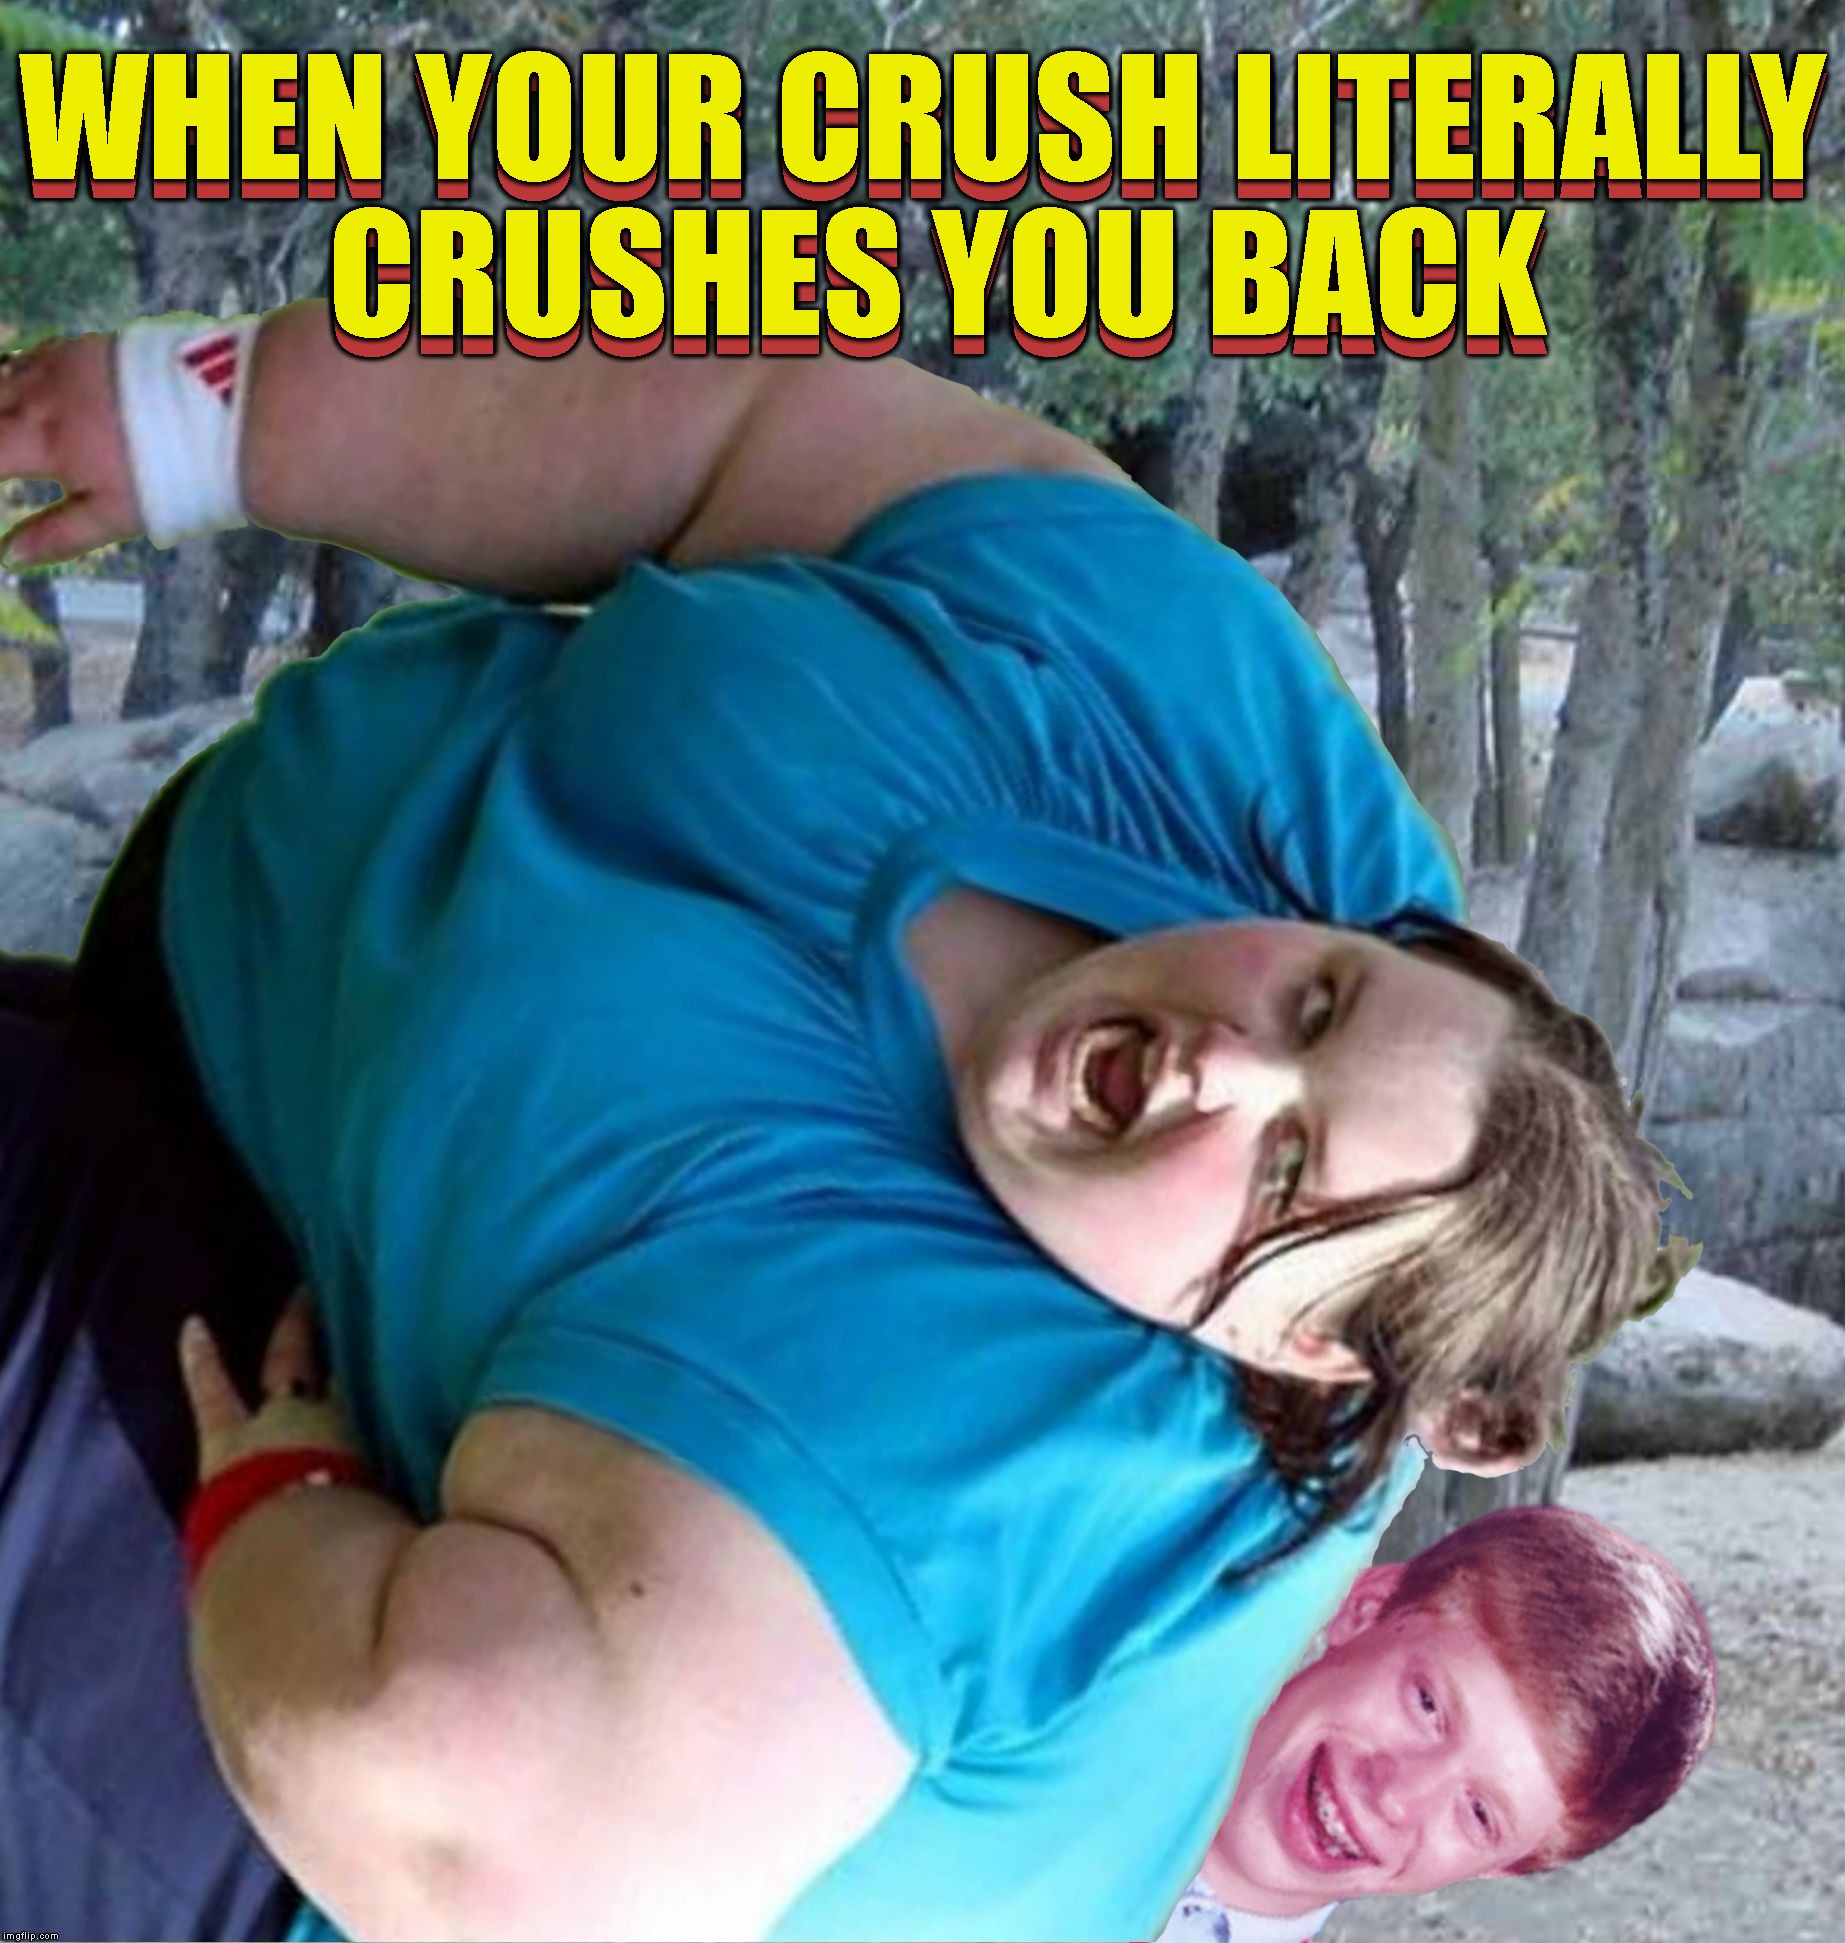 You Didn't Really Need That Spine Anyway |  WHEN YOUR CRUSH LITERALLY CRUSHES YOU BACK; WHEN YOUR CRUSH LITERALLY CRUSHES YOU BACK | image tagged in bad luck brian crush,bad luck brian,really fat girl,fat chicks,relationships,fat women | made w/ Imgflip meme maker